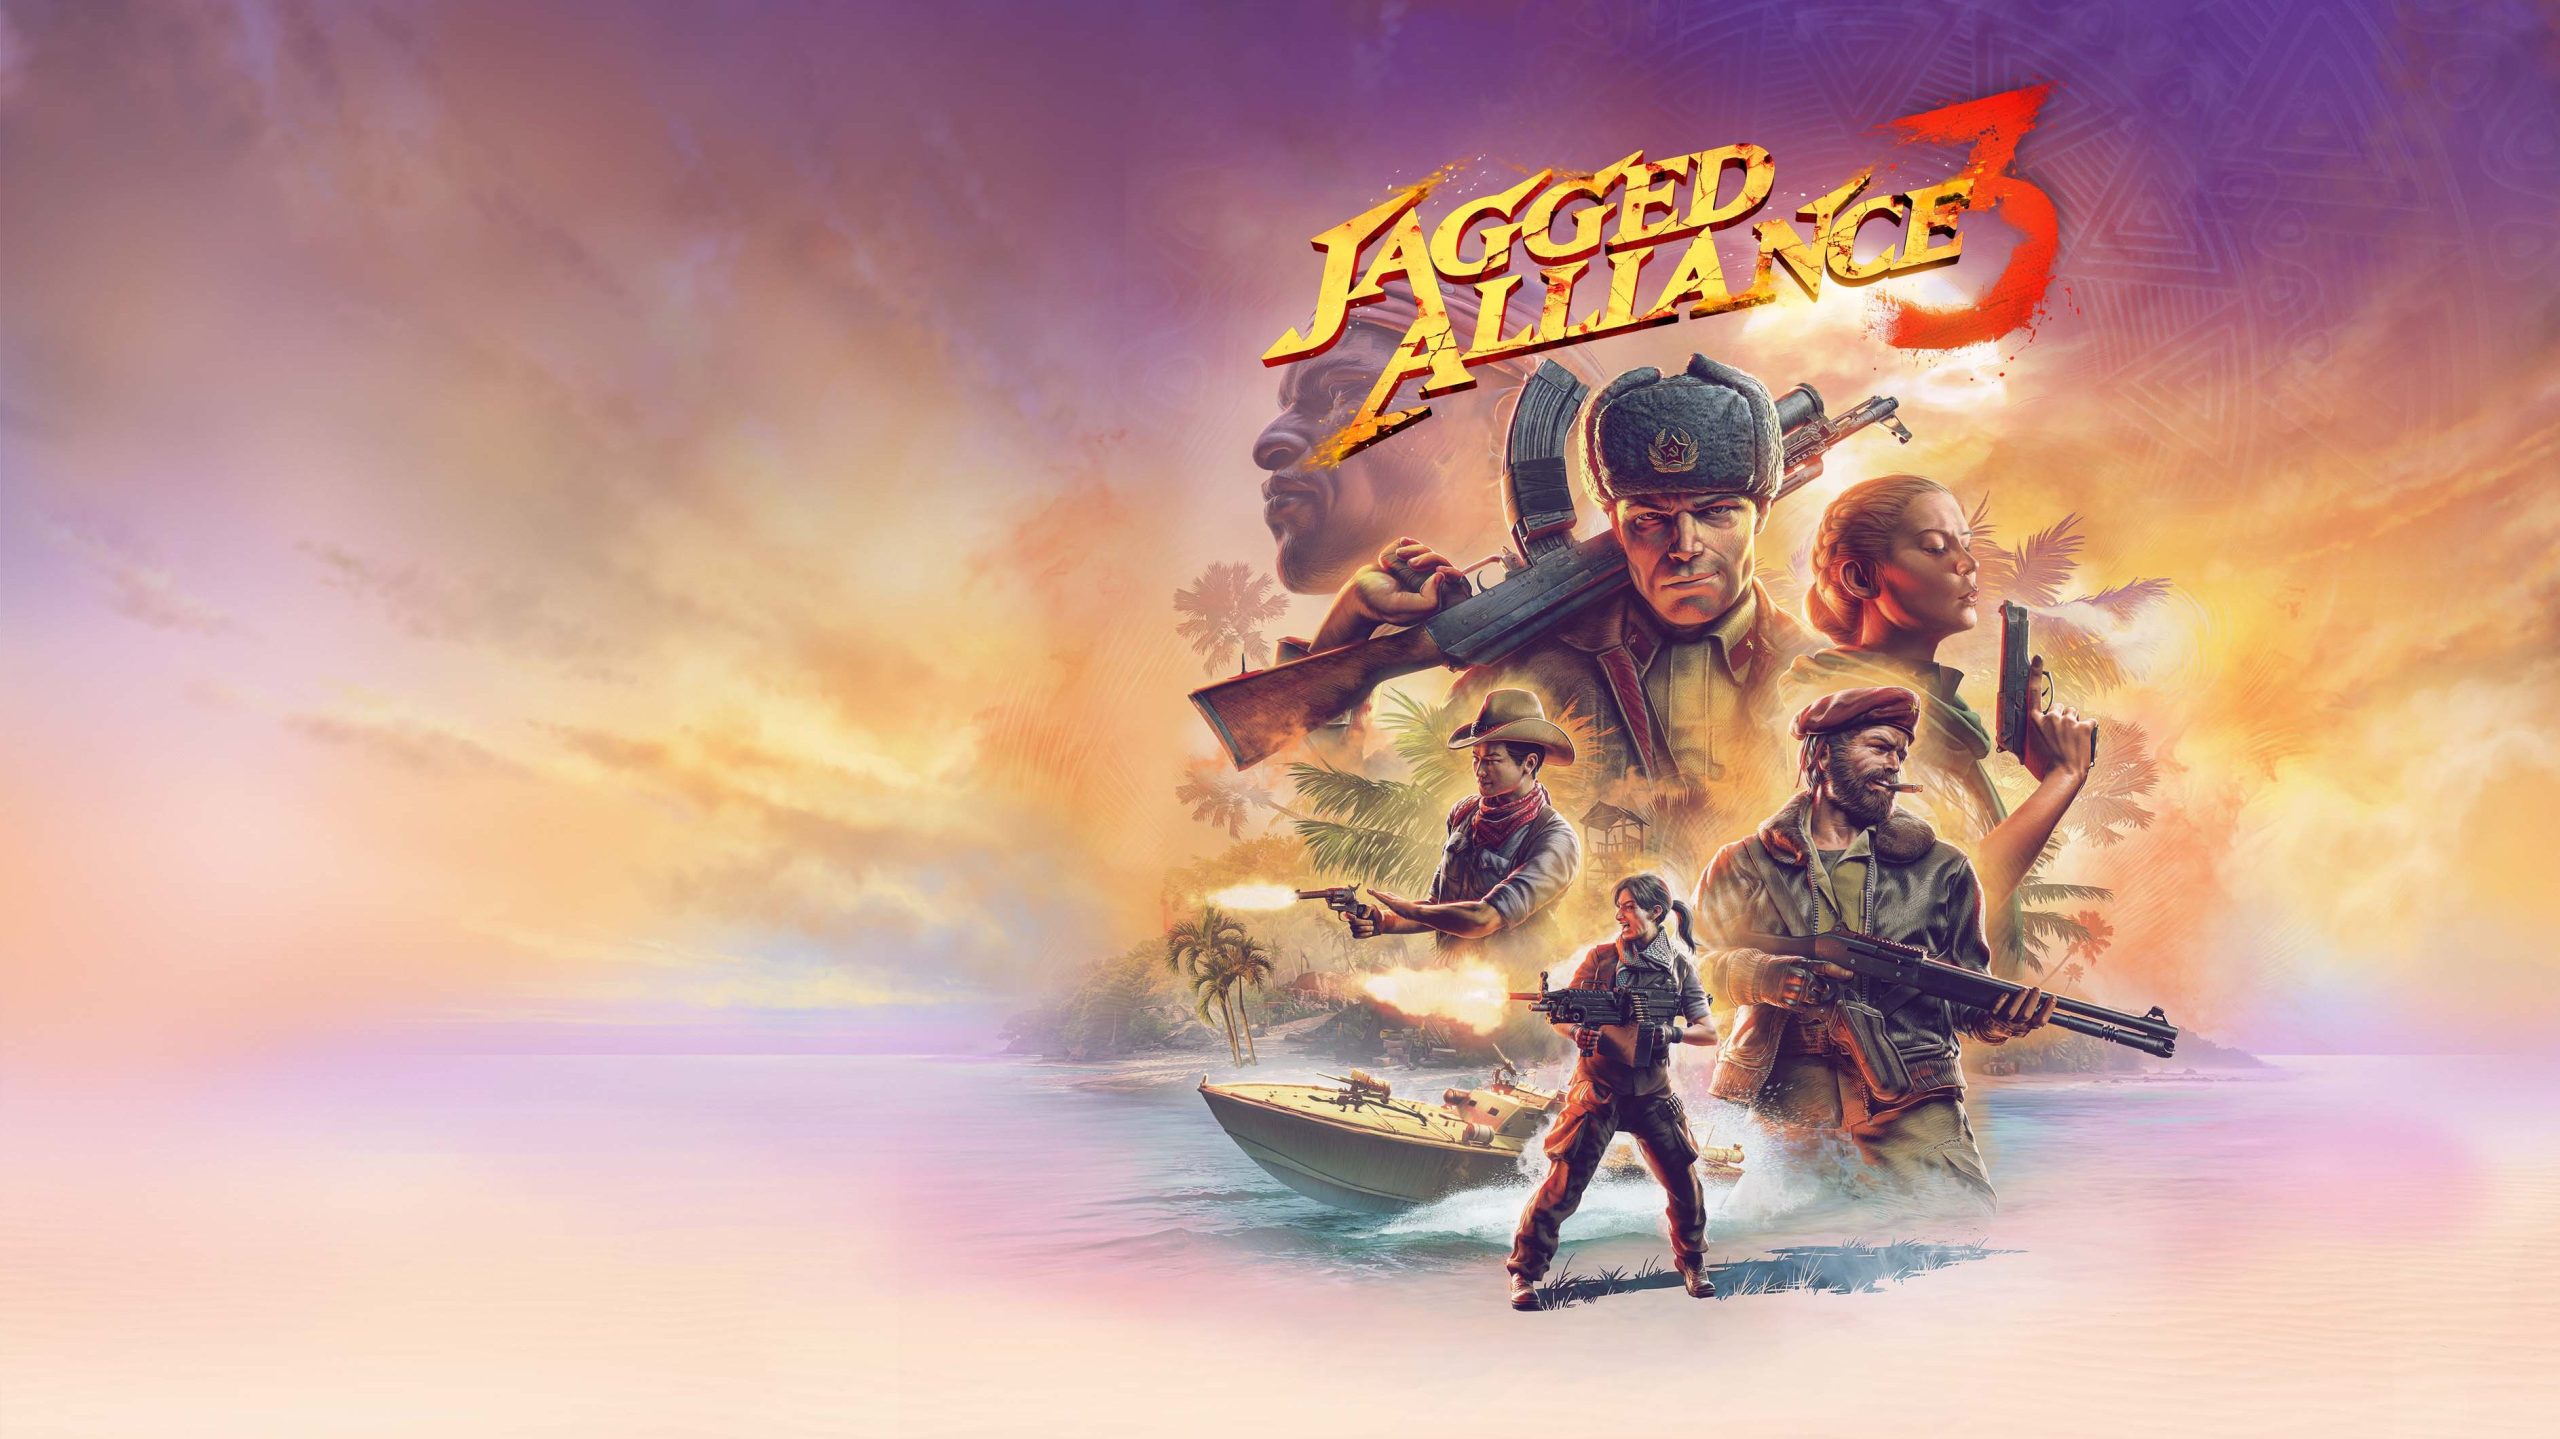 Jagged Alliance 3 Save Game Location and How to Fix If Save Game Not Loading?